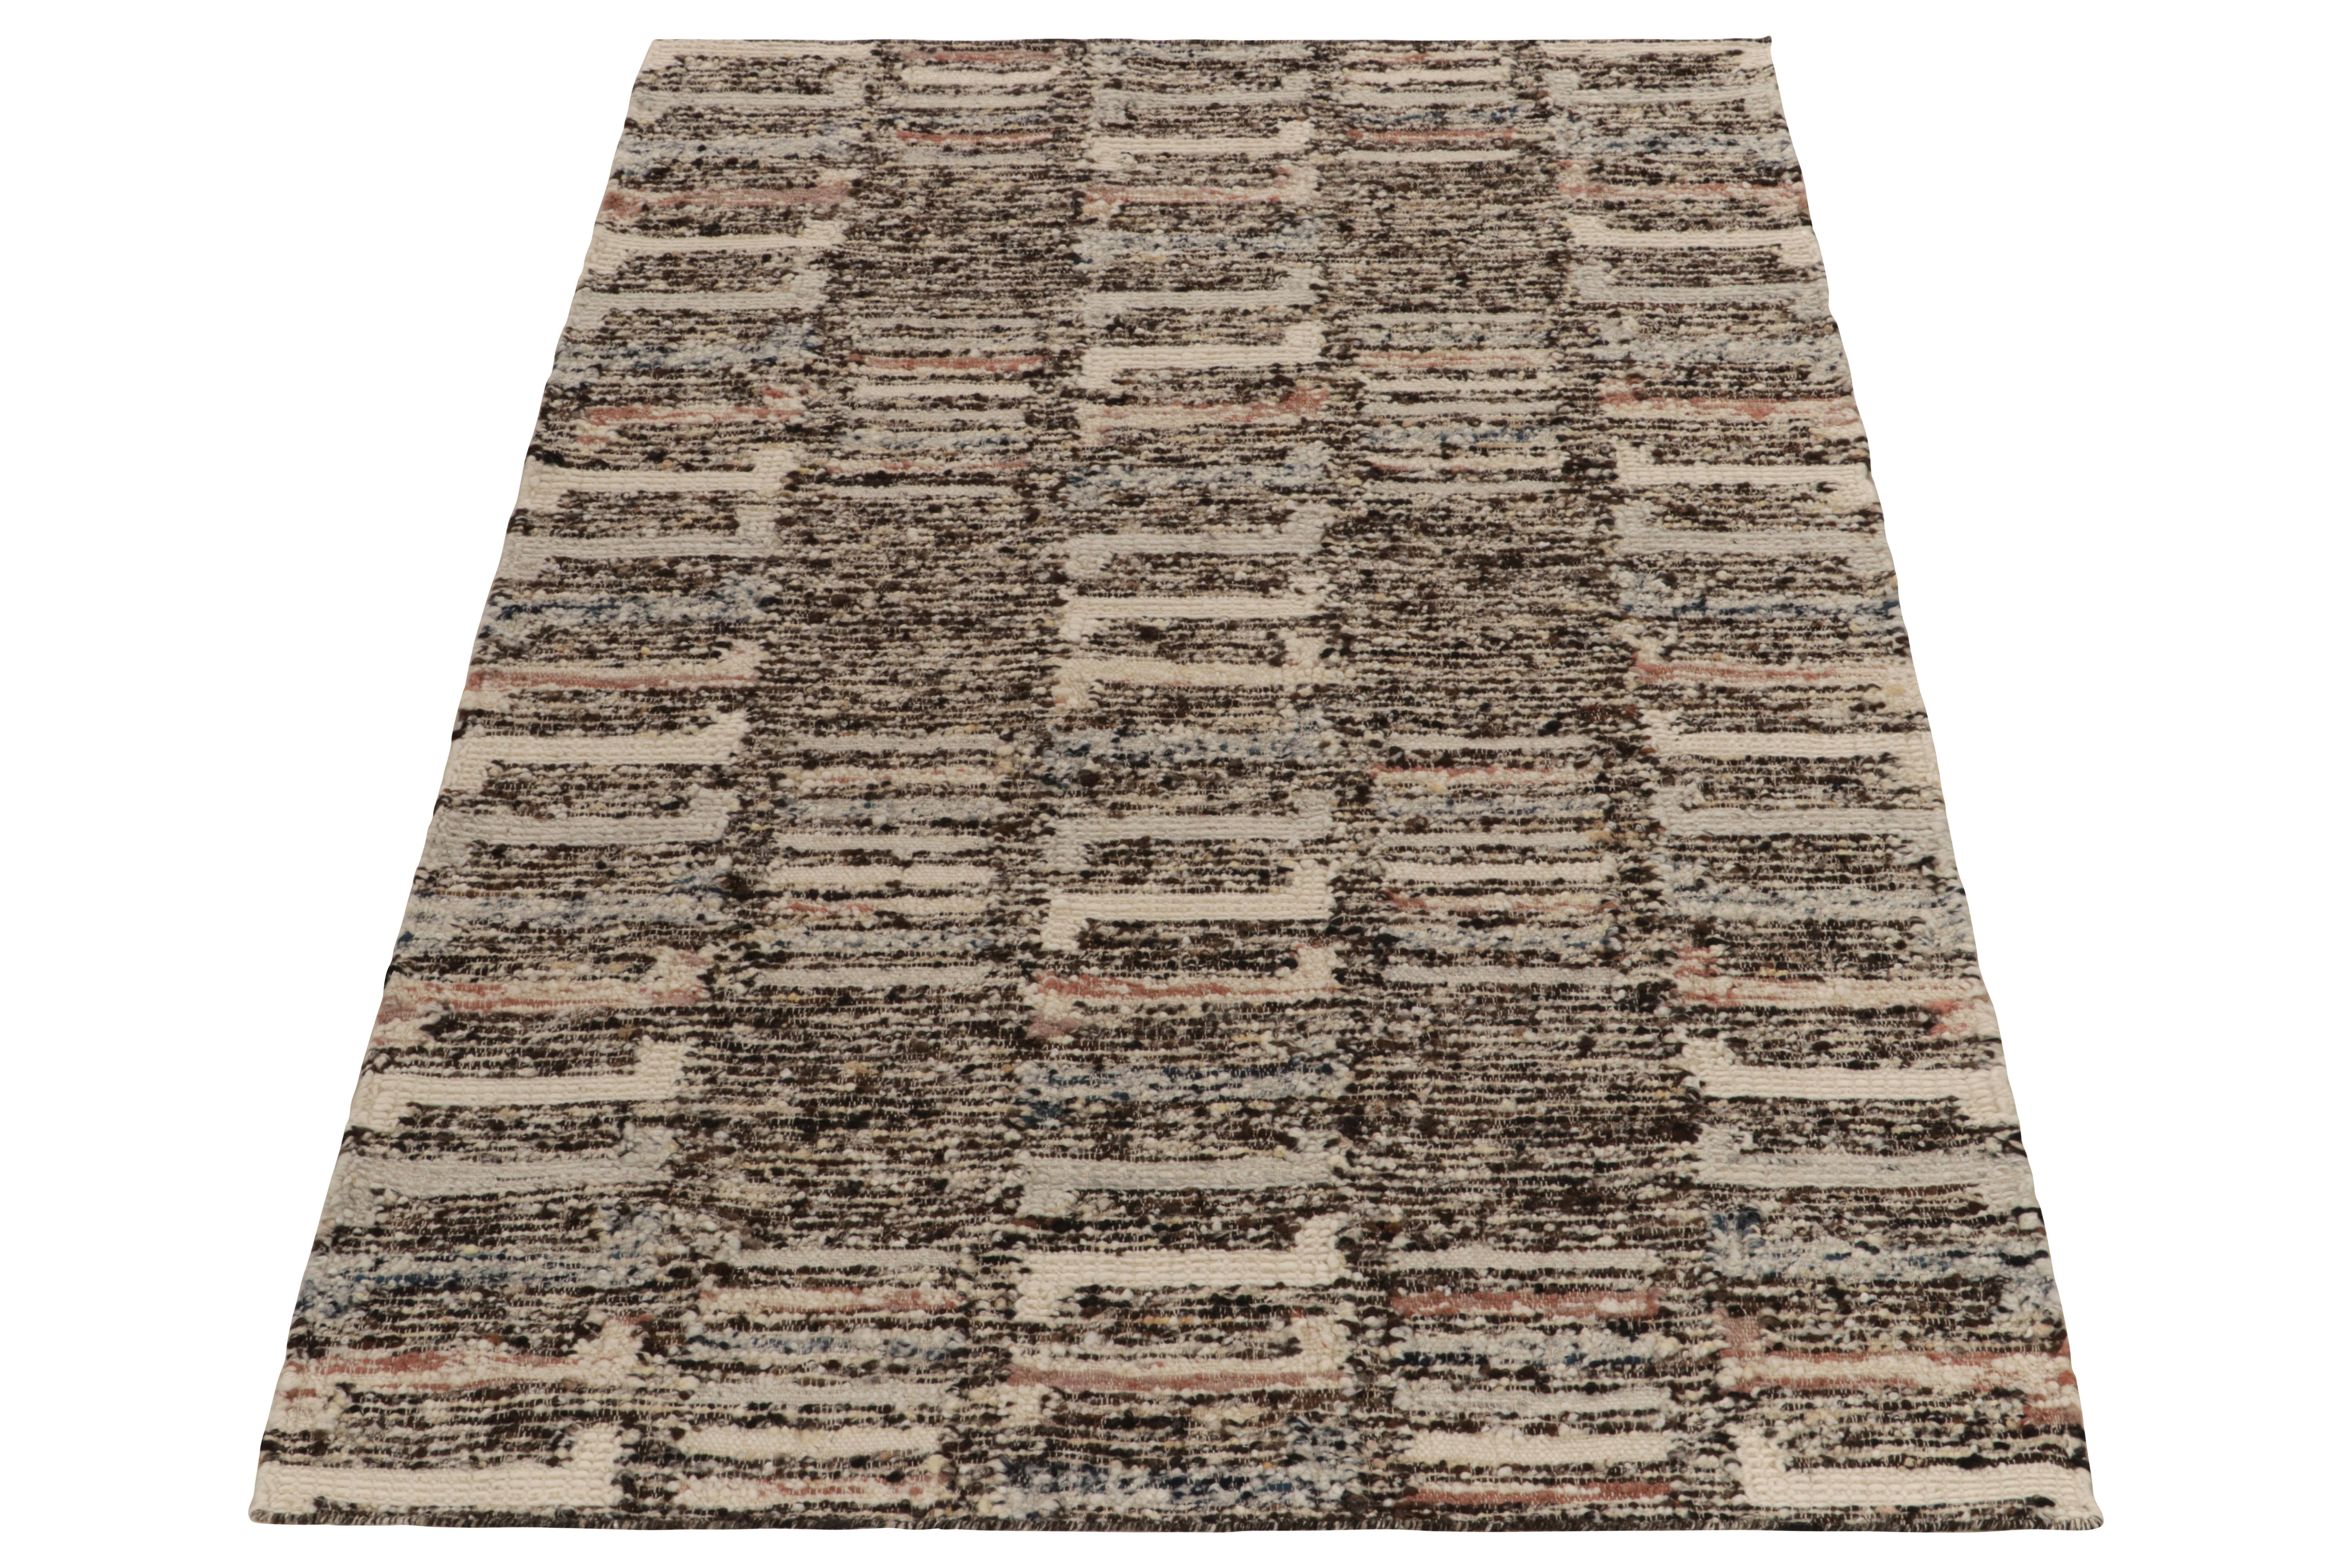 Rug & Kilim unveils its innovation in style & technique with this 5x8 flat weave rug, exploring bold marriage of polychromatic color and pattern. The Kilim enjoys a modern geometric pattern in carrot red, sky blue, brown & beige in a prevailing